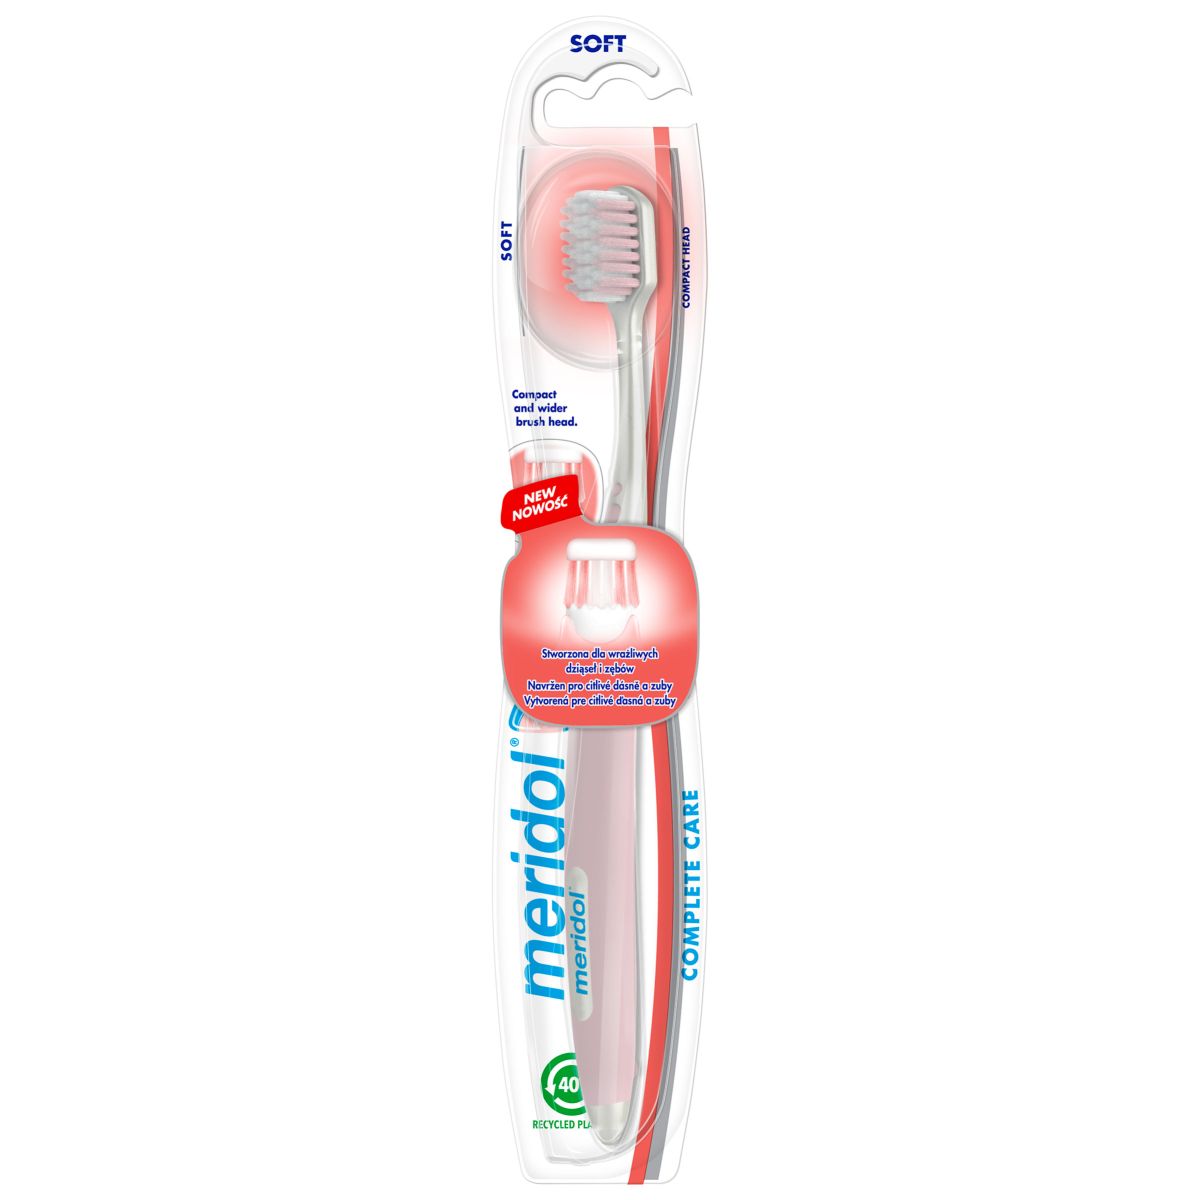 61020761_R1CB_Meridol-Complete-Care-Toothbrush-0.0-CZ,HU,PL,SK-FRONT-OF-PACK